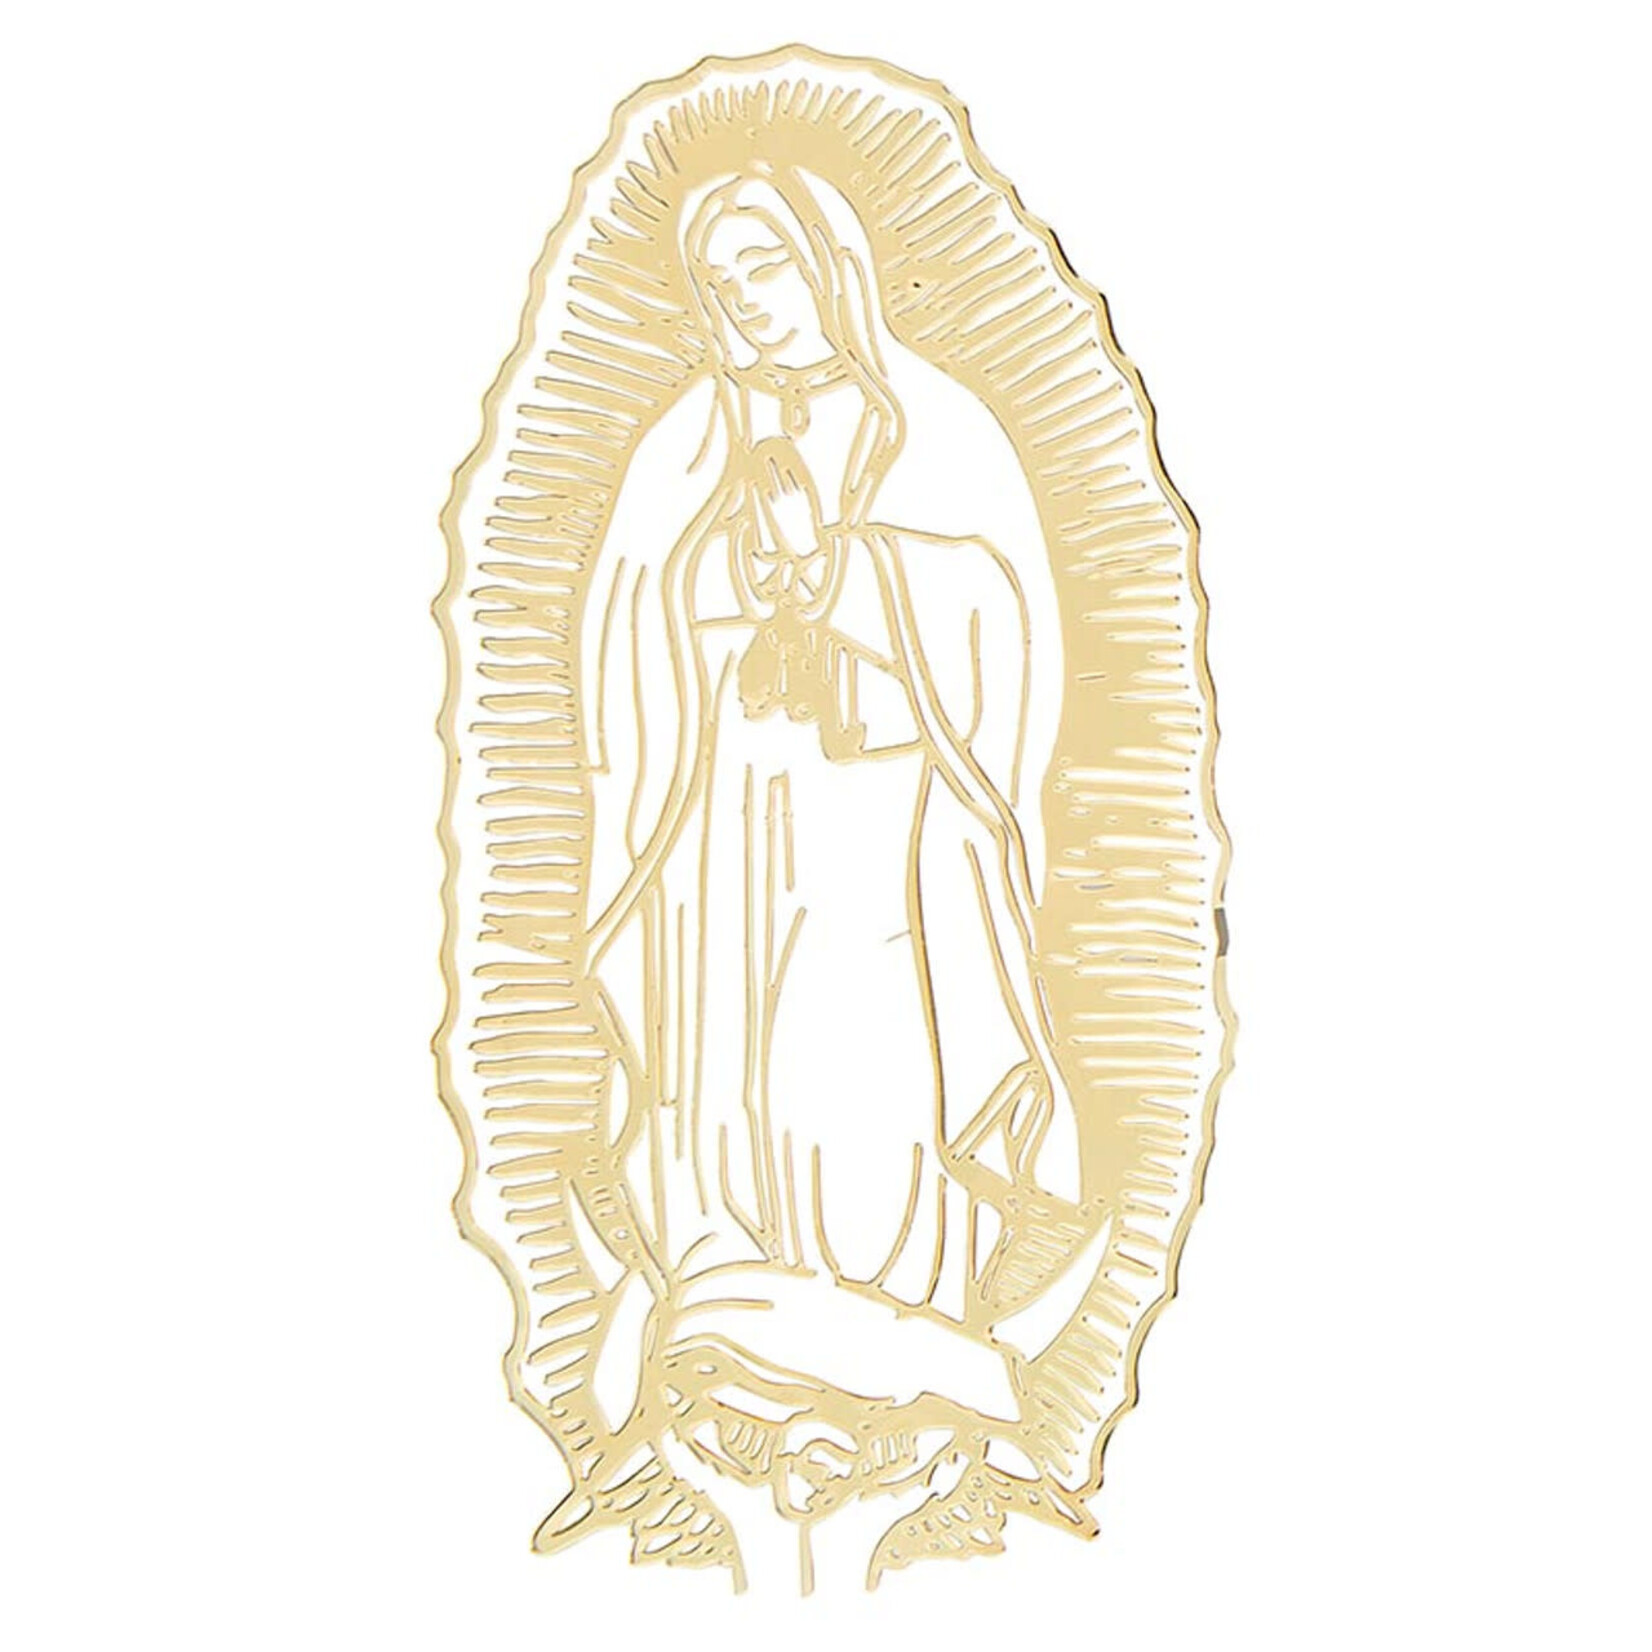 Our Lady of Guadalupe Phone Decal